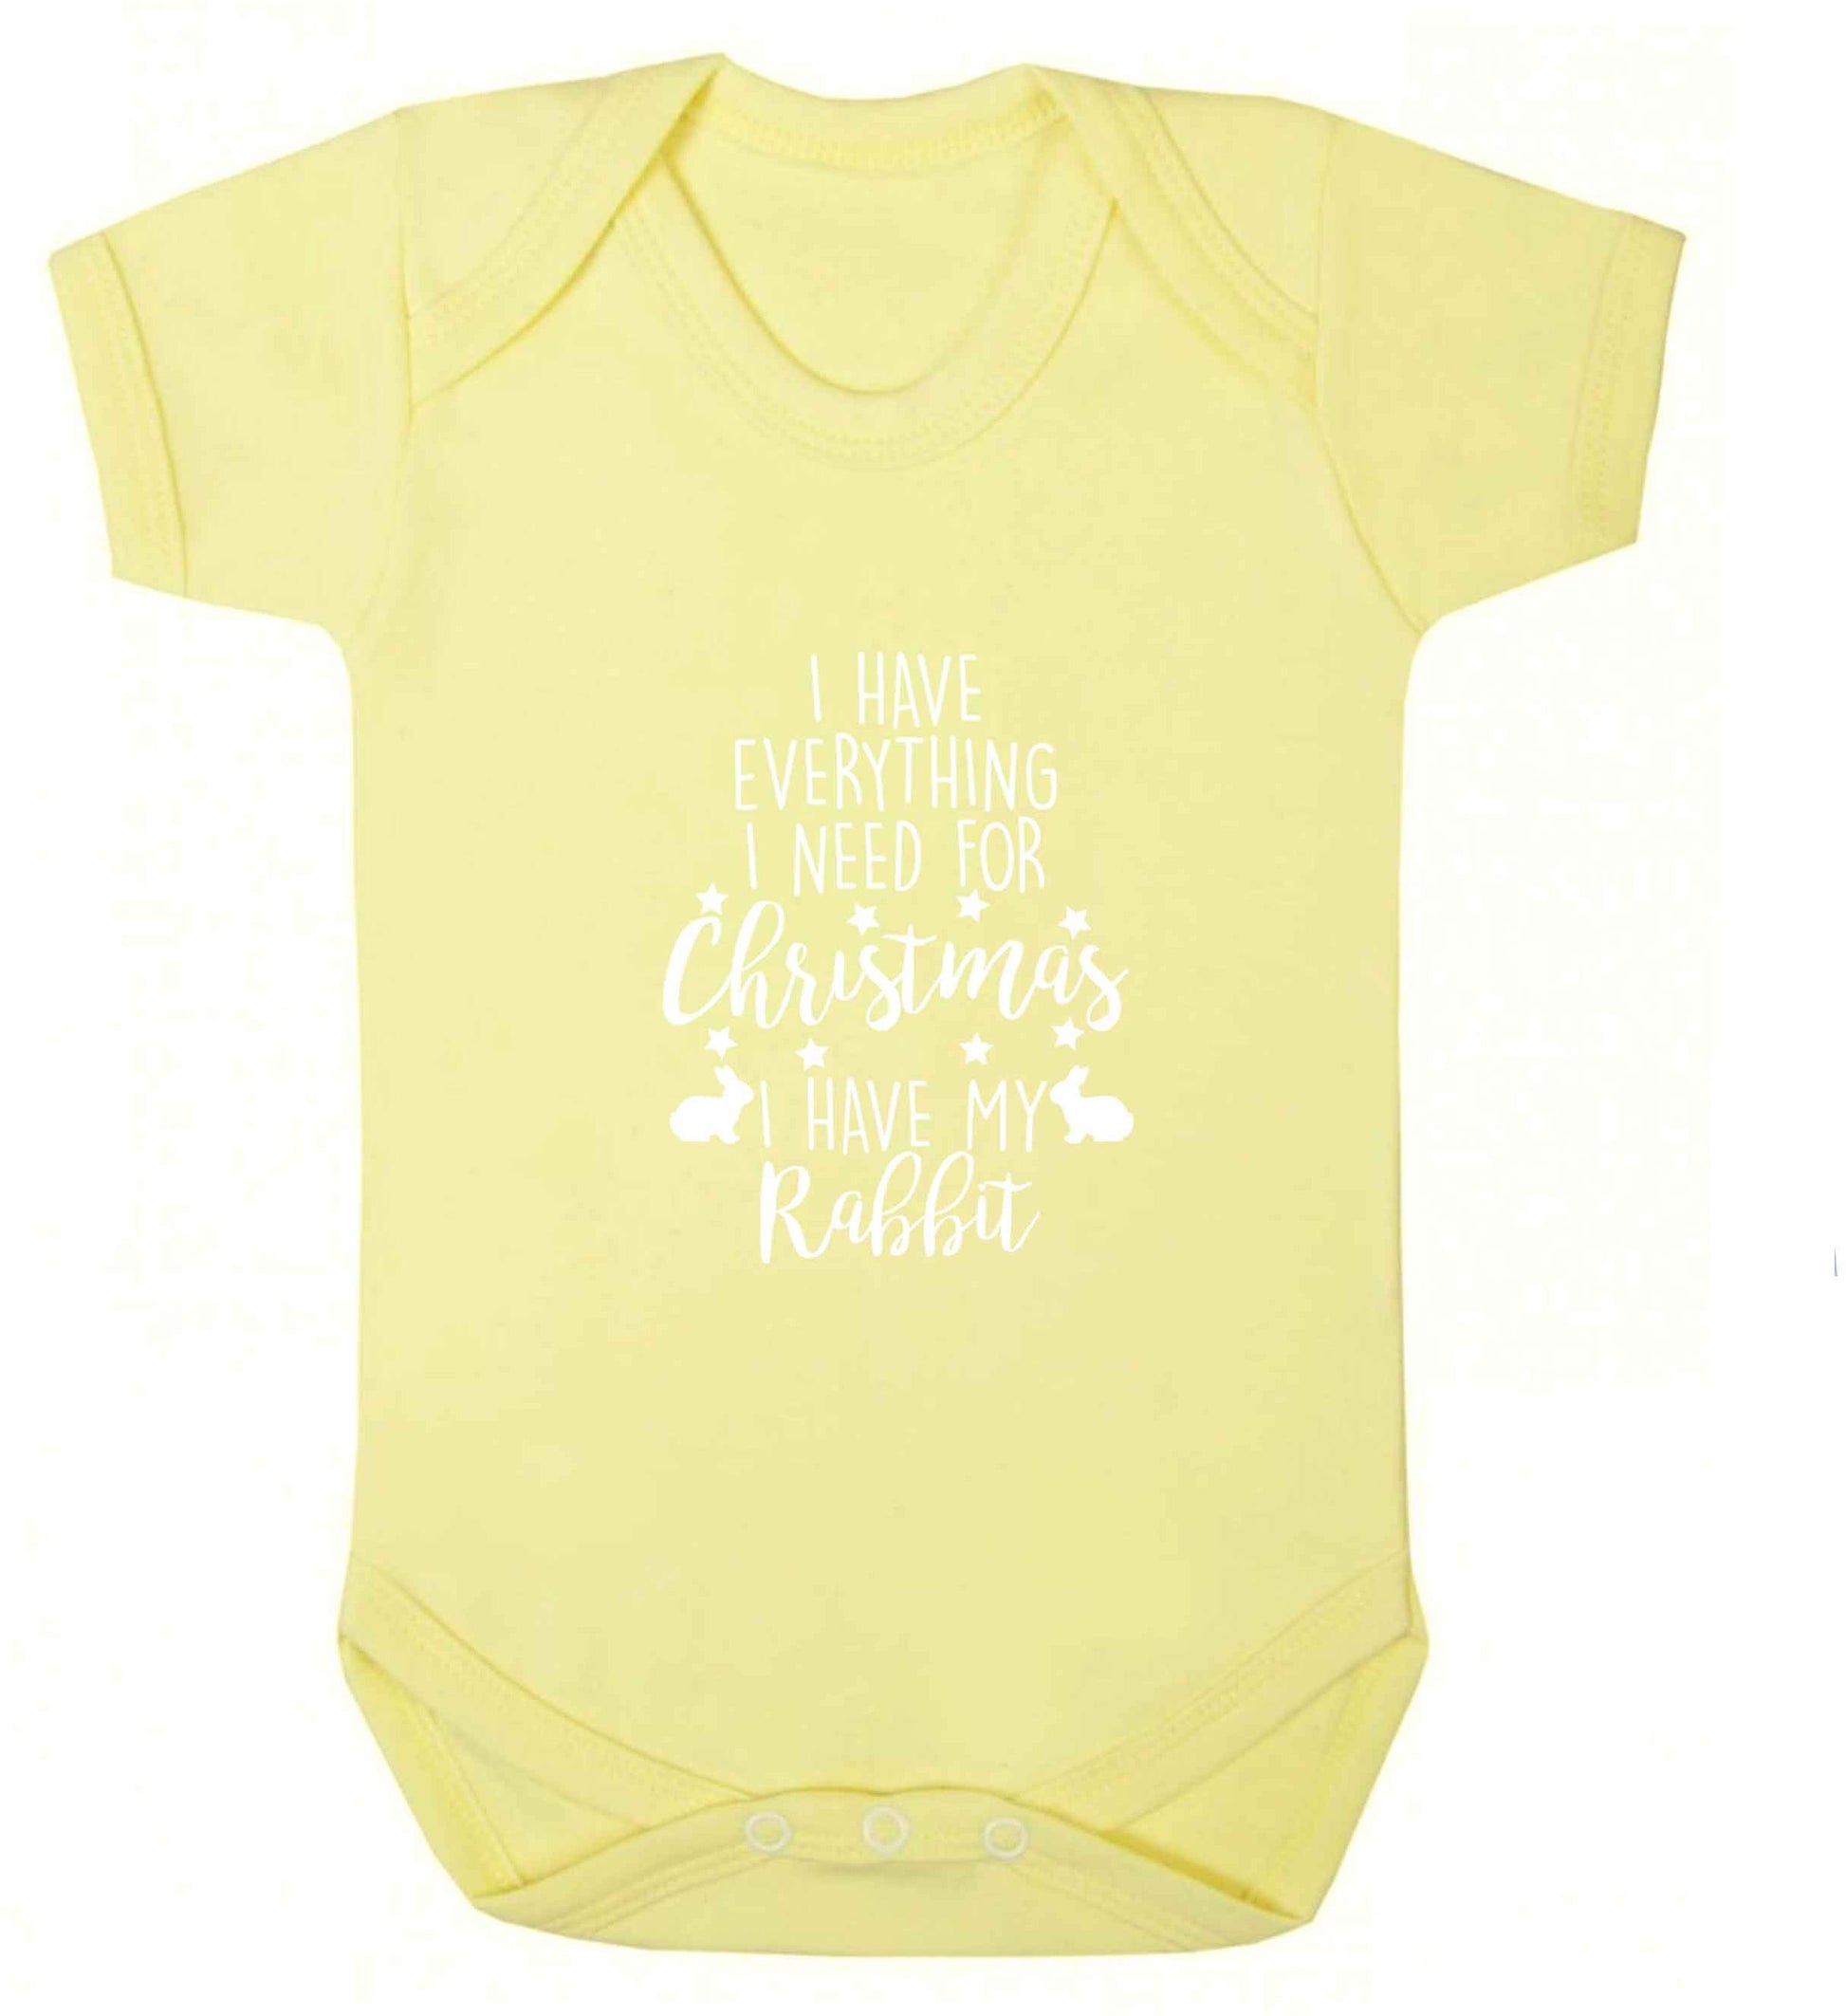 I have everything I need for Christmas I have my rabbit baby vest pale yellow 18-24 months